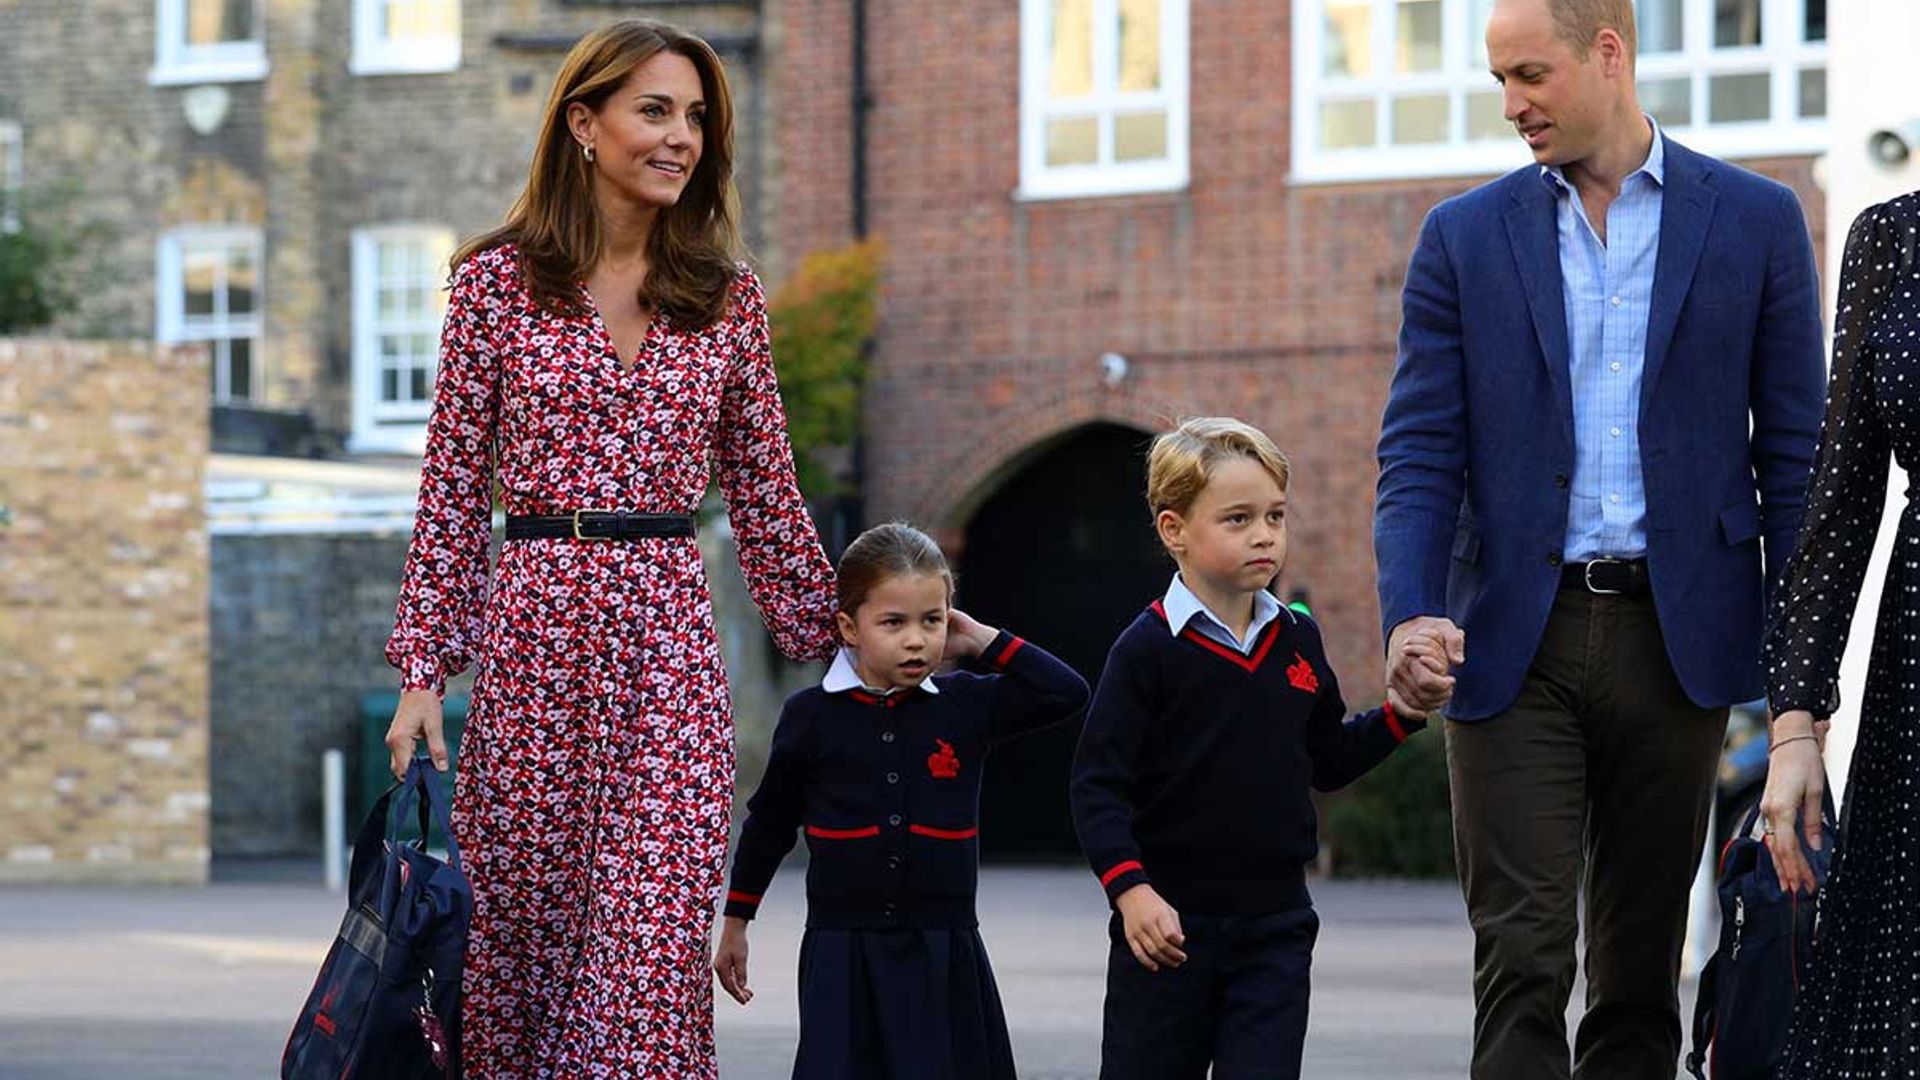 Kate Middleton reveals what Prince George and Princess Charlotte are learning at school